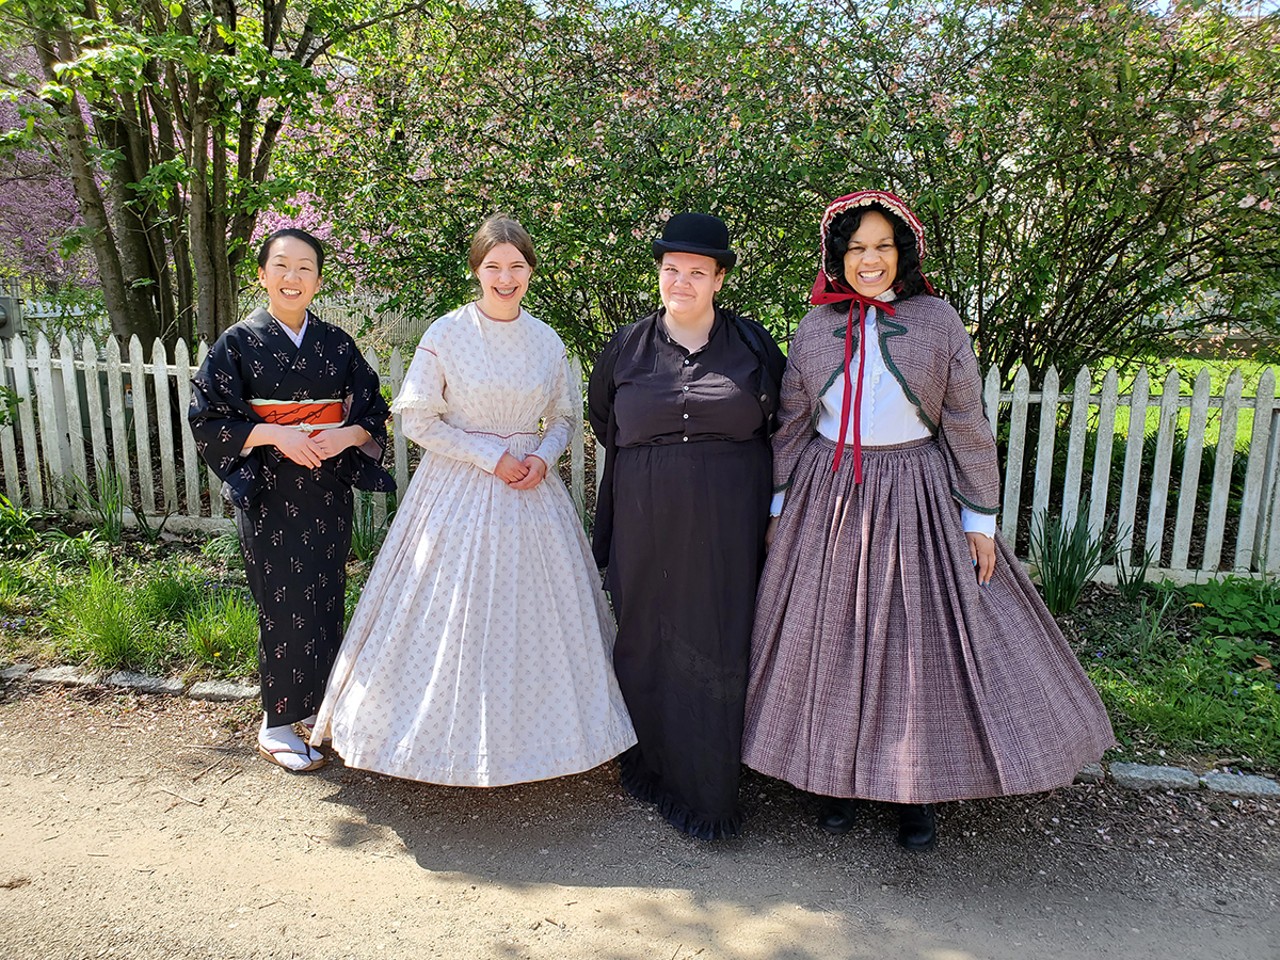 Heroines of Our History
12-4 p.m. April 29
Get to know some of the Greater Cincinnati women who made history through historical reenactors at the Heritage Village Museum.There will also be vendors and hands-on activities. Admission is $10 for adults, $5 for kids 5-11 and free for kids 4 and under and members.
12-4 p.m. April 29. Heritage Village Museum and Educational Center, 11450 Lebanon Road, Sharonville, heritagevillagecincinnati.org.